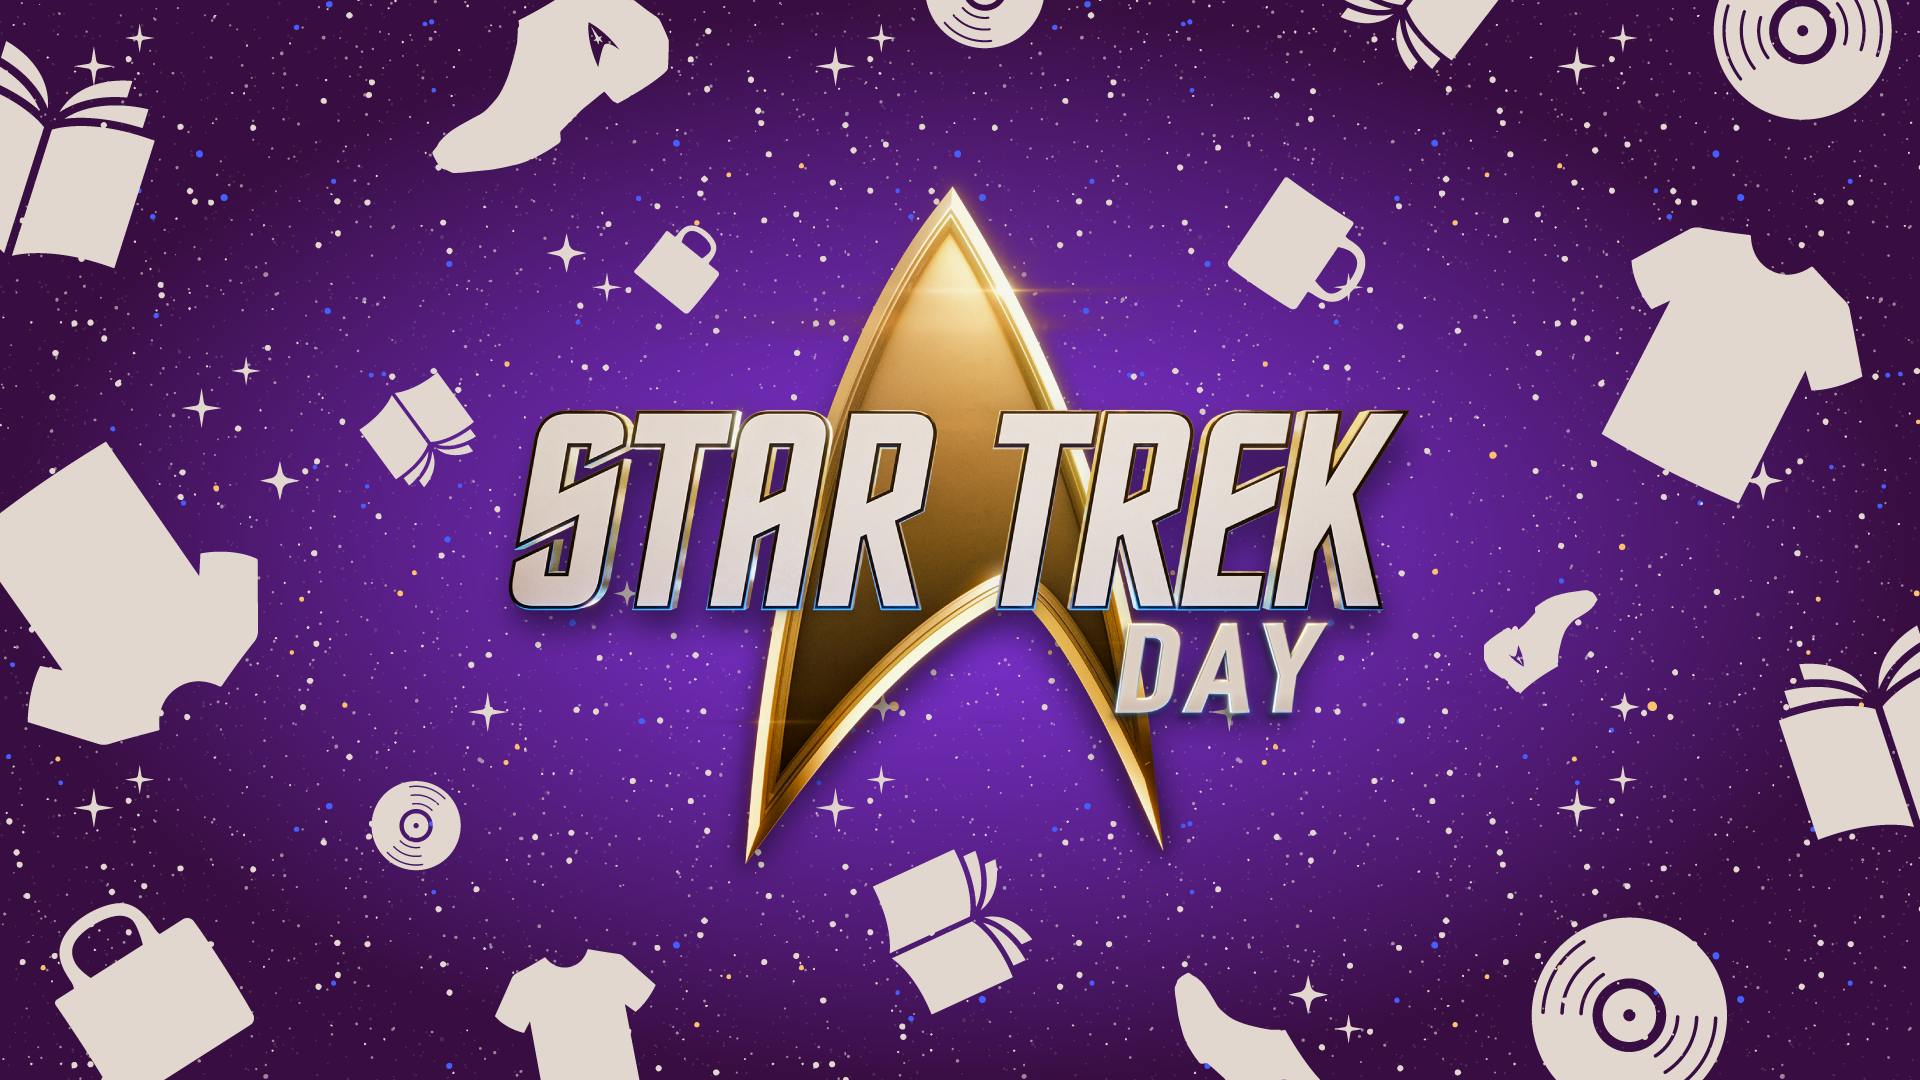 Star Trek Day logo surrounded by iconography of books, boots, vinyl records, shoes, and mugs